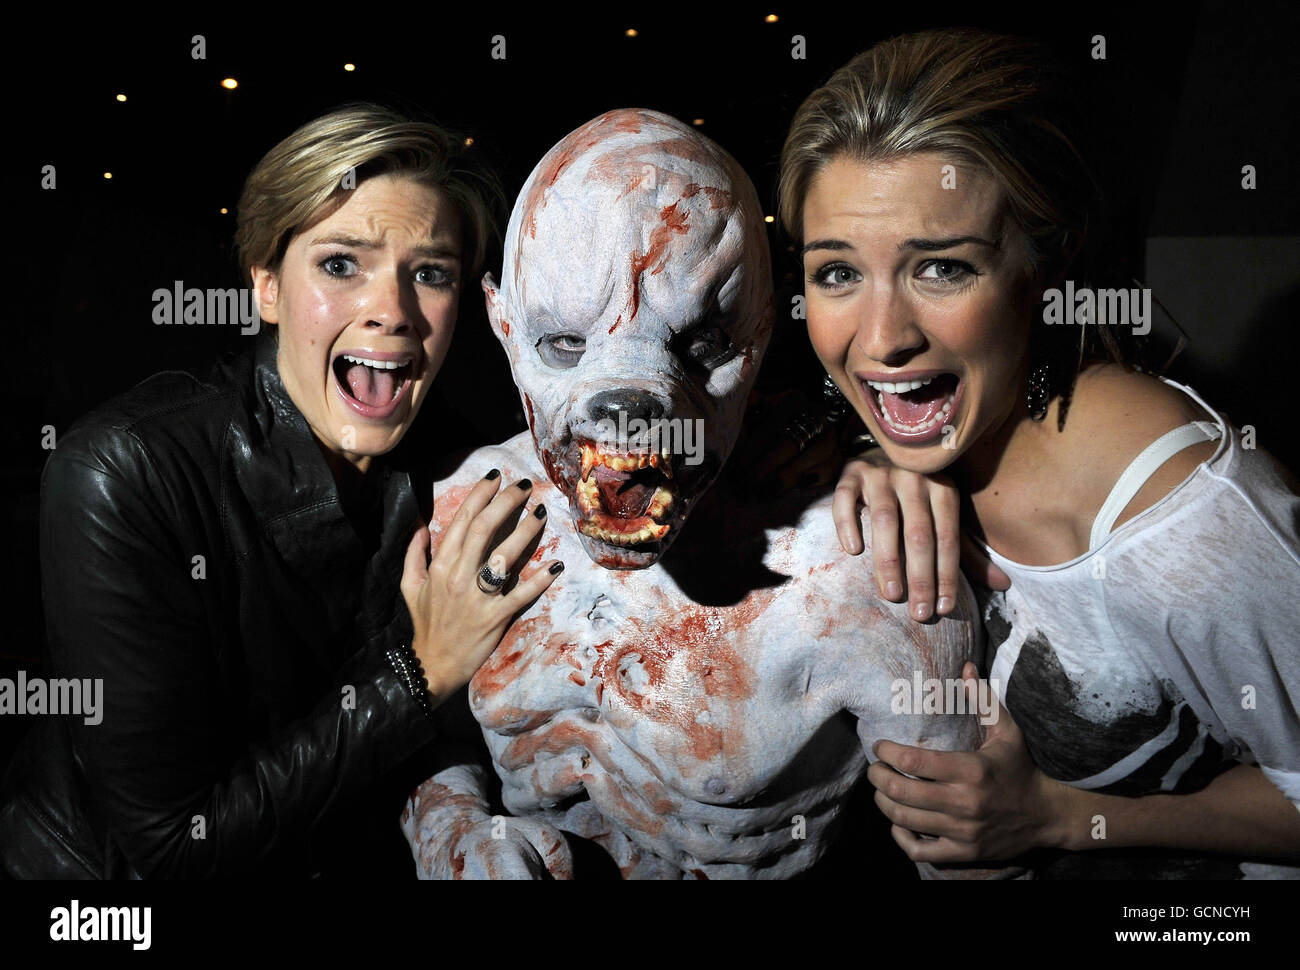 Gemma Atkinson (right) and Isabella Calthorpe pose with a werewolf to promote new British horror film 13 hrs which premiered at the Empire Cinema in Leicester Square, London, as part of Film 4's Frightfest horror movie festival. Stock Photo